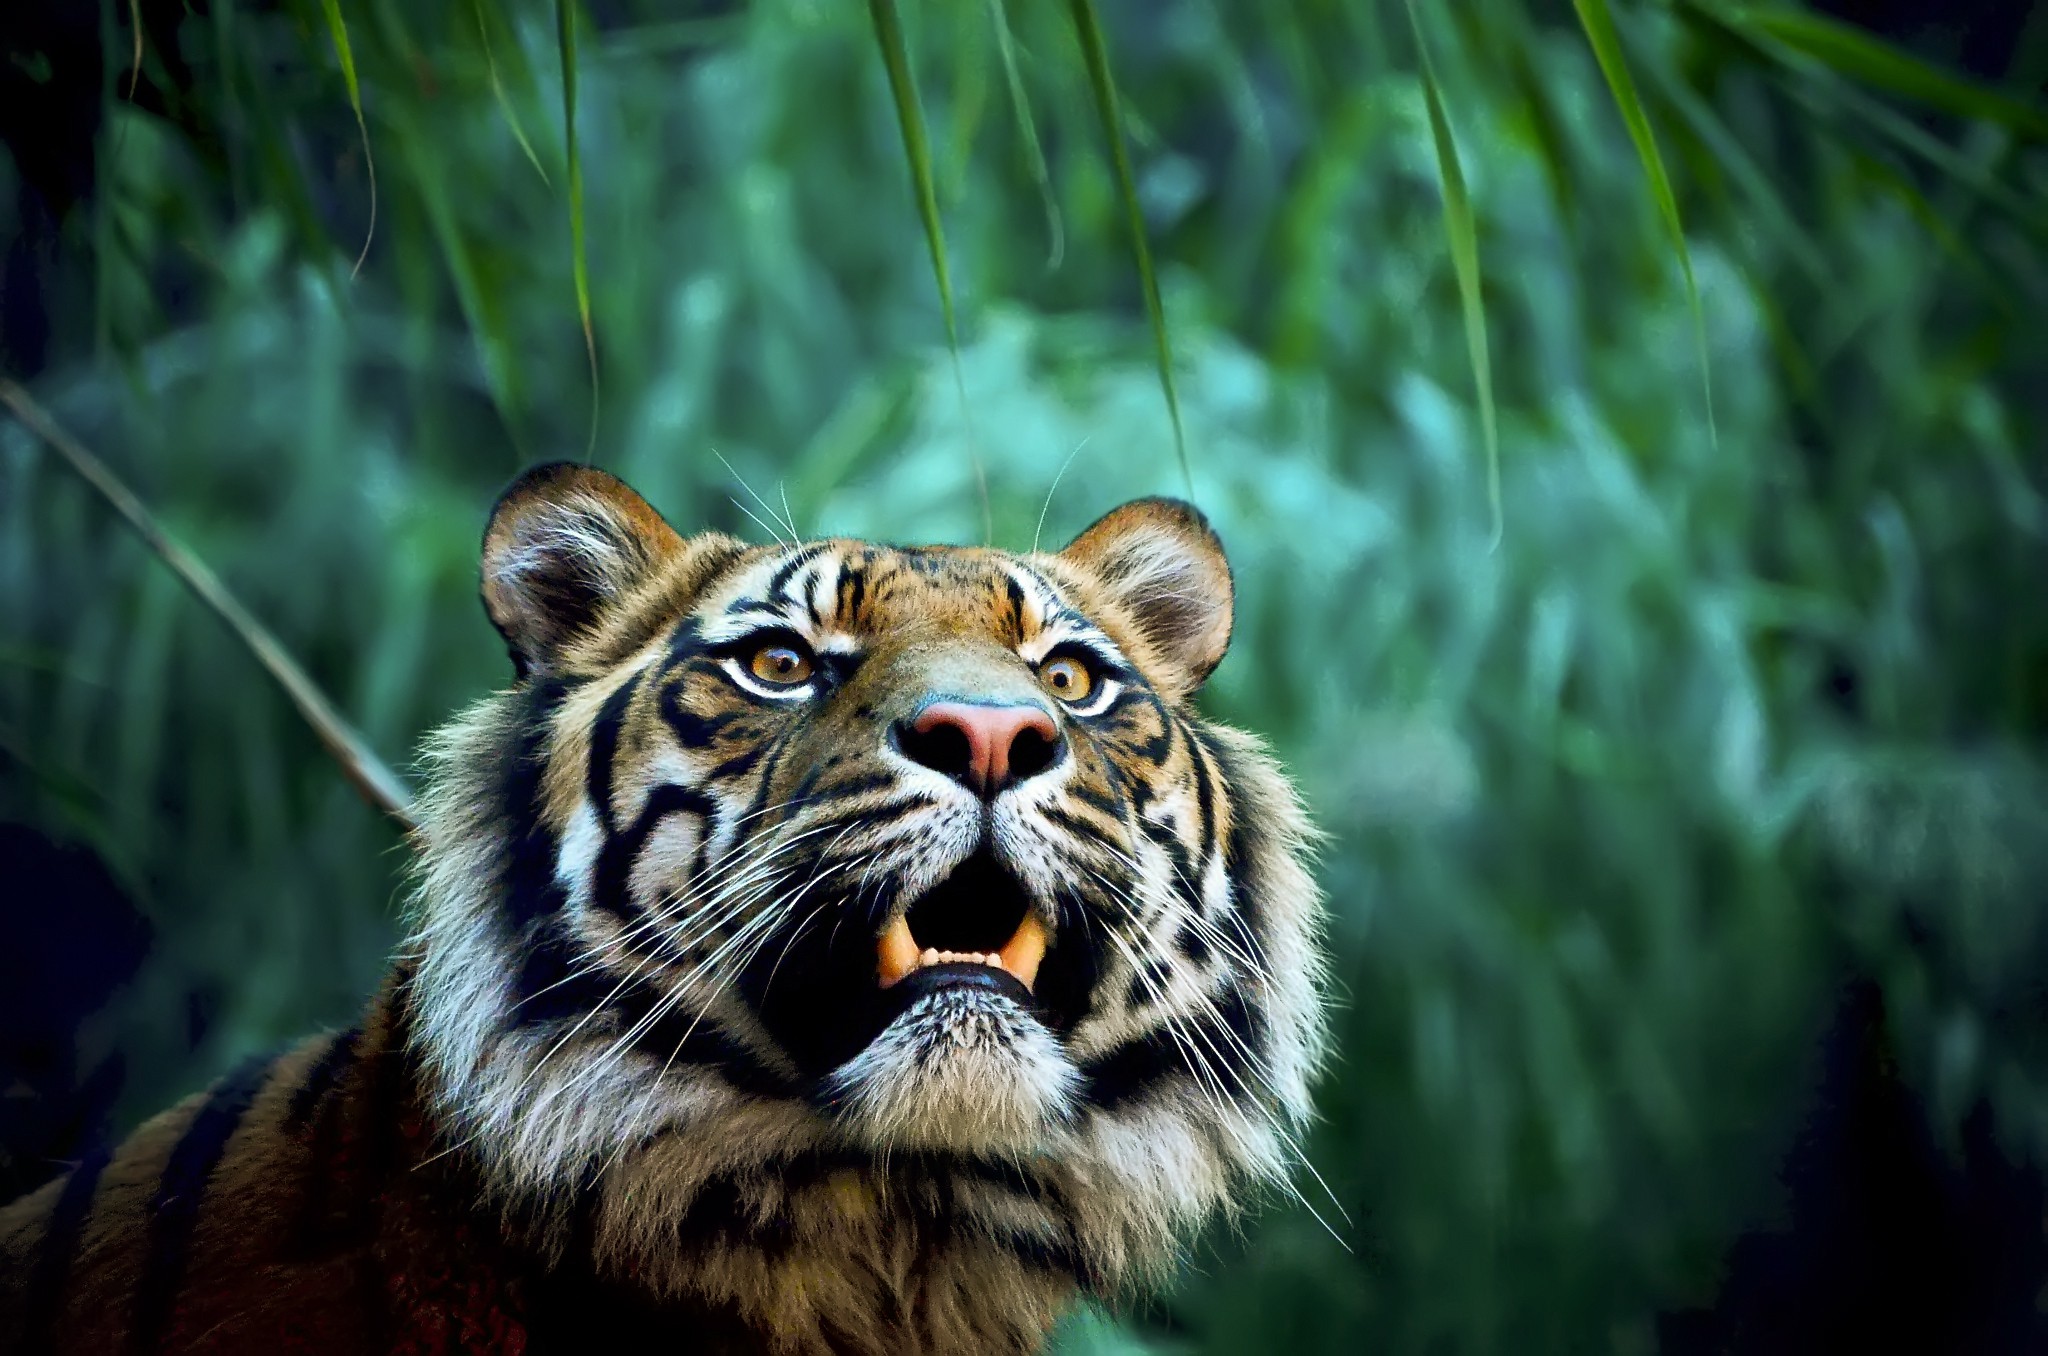 Download wallpaper for 240x400 resolution | Tiger in jungle | animals ...